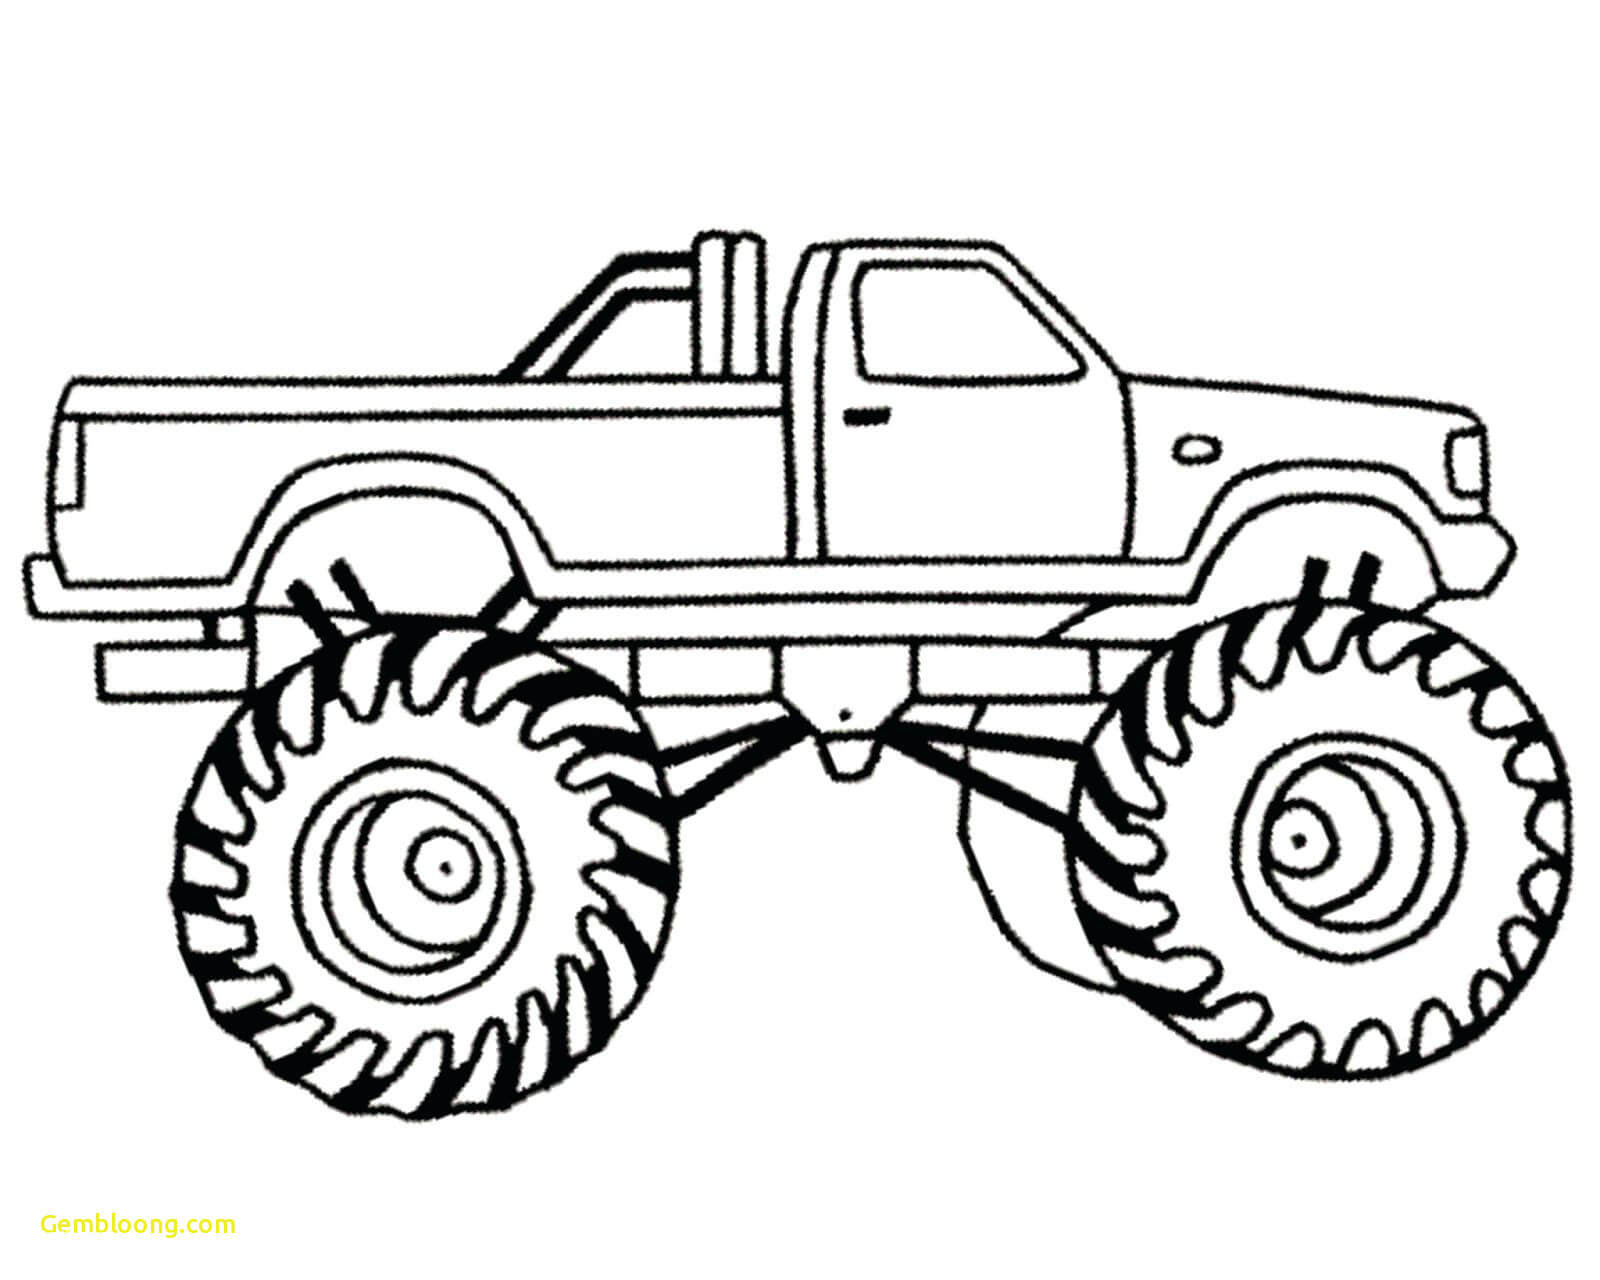 Fabulous Truck coloring page